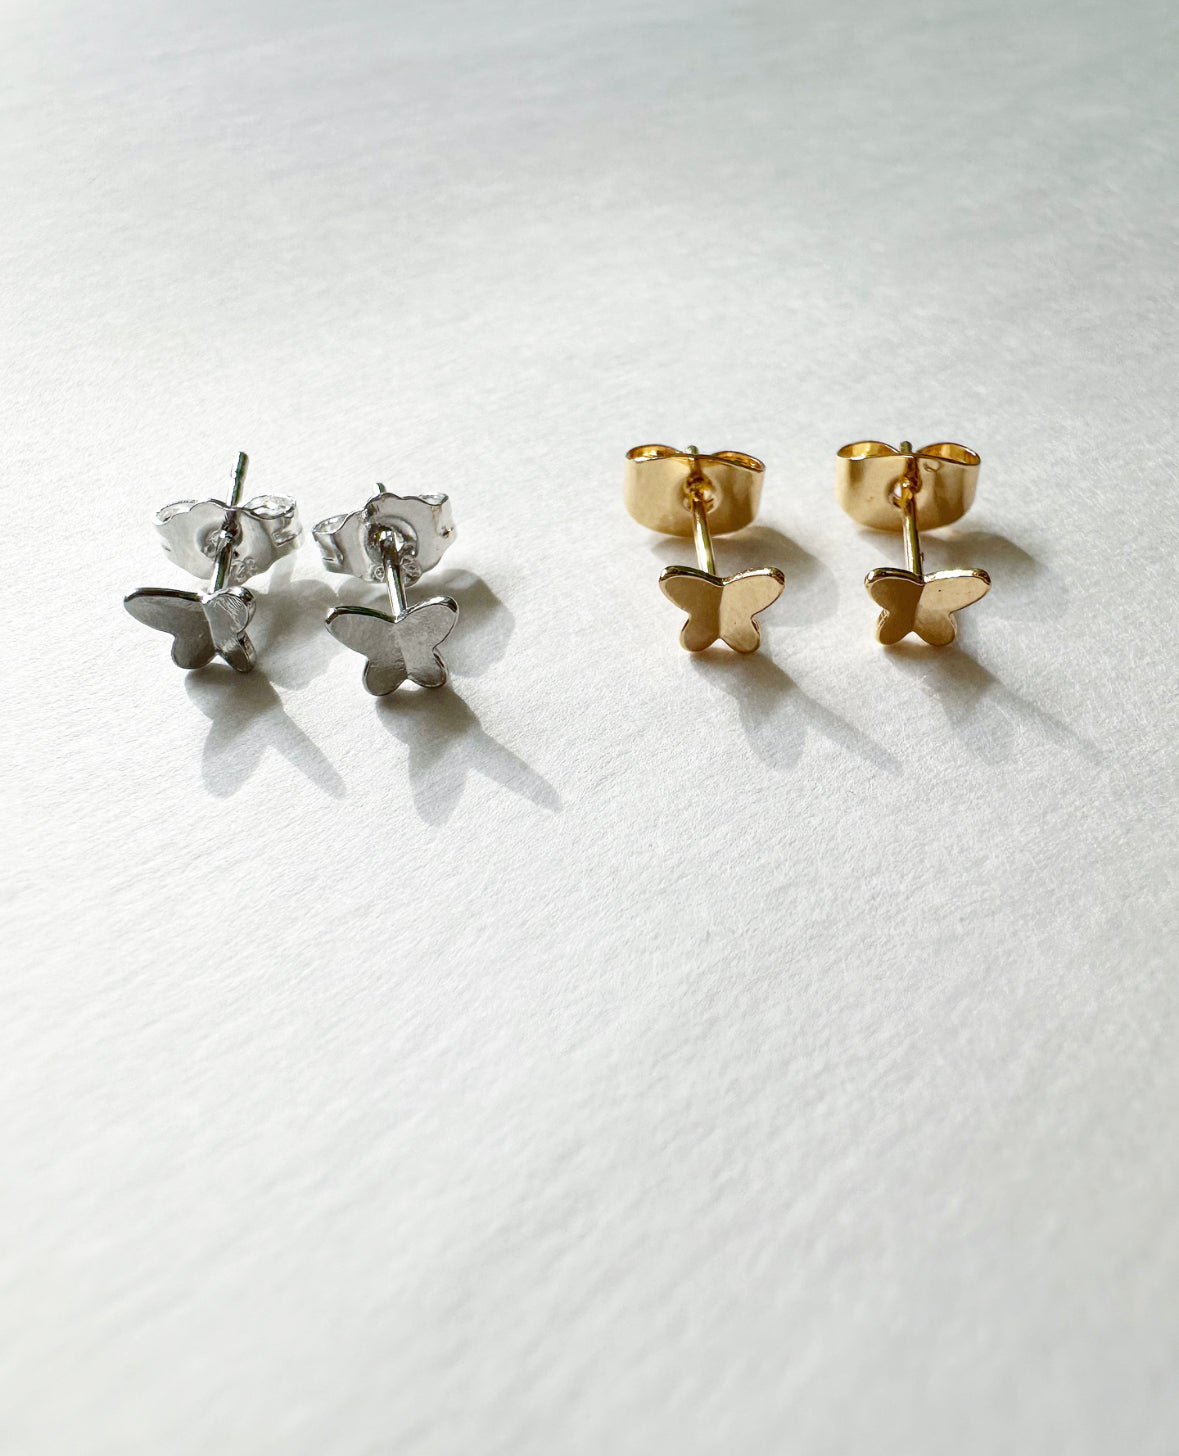 Alternate photo of silver and gold small, butterfly-shaped Tiny Flutters Stud Earrings.